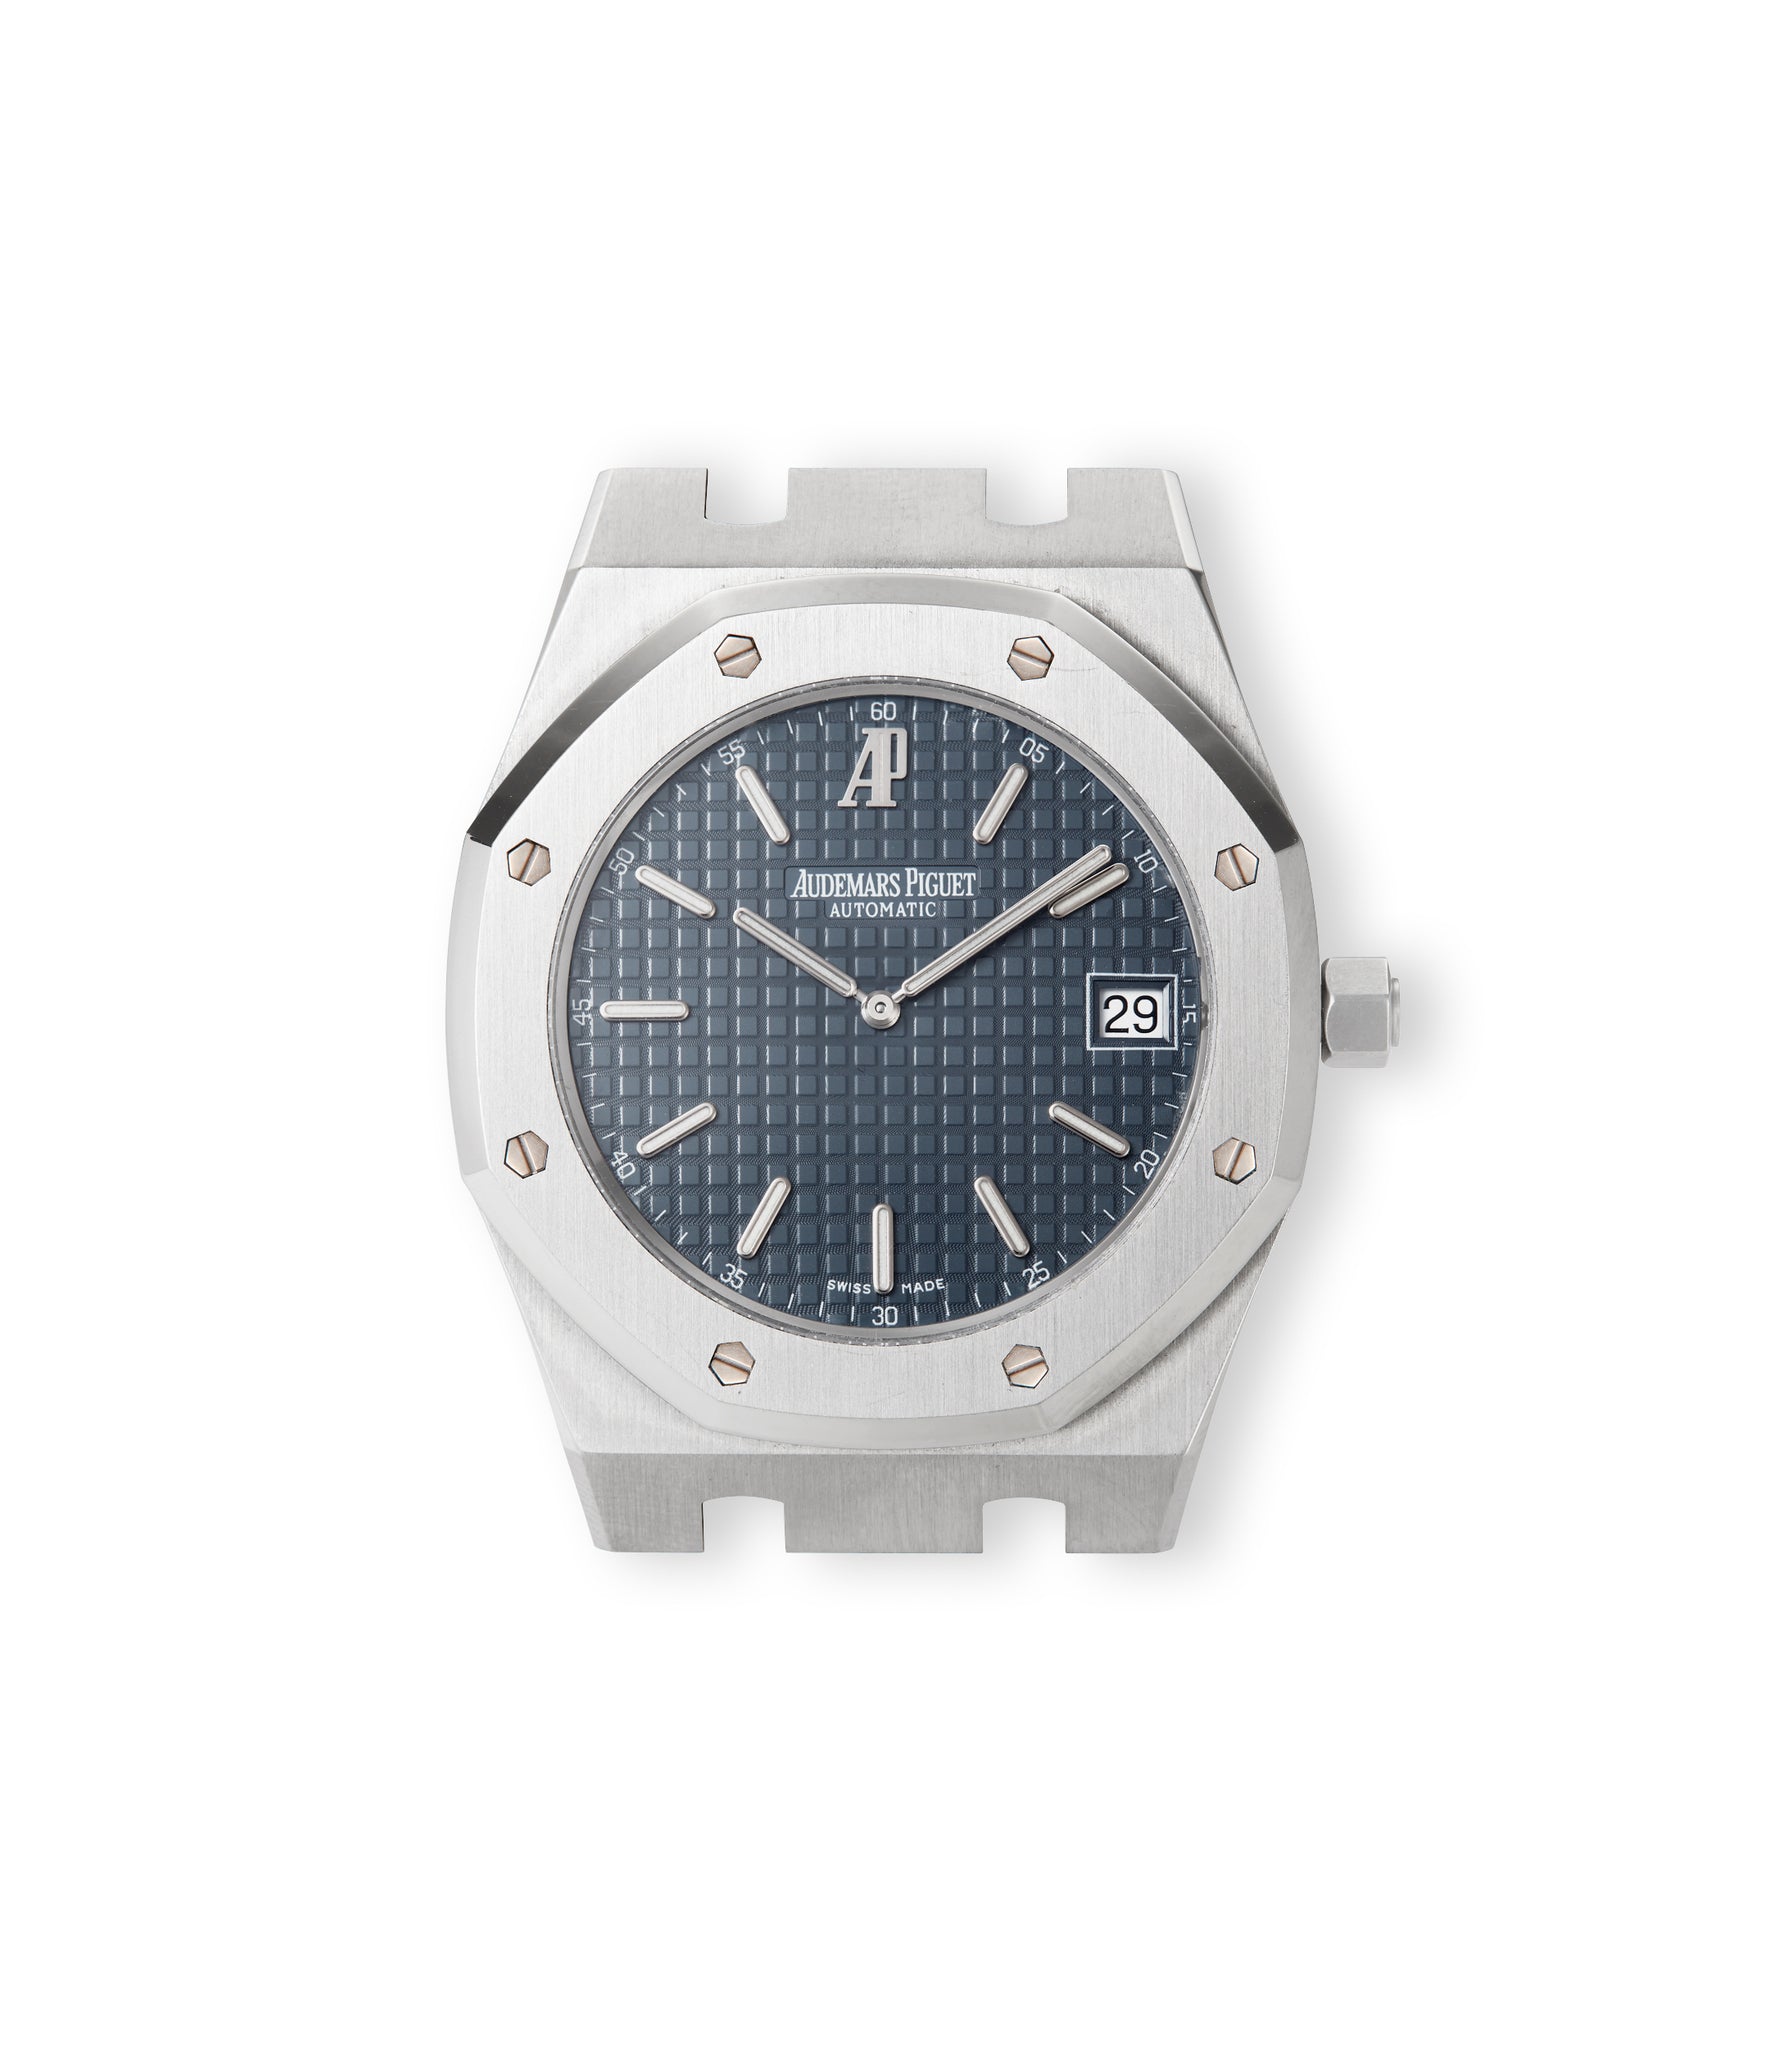 front dia | buy Audemars Piguet Royal Oak 15202ST.OO.0944ST.03 Stainless Steel preowned watch at A Collected Man London